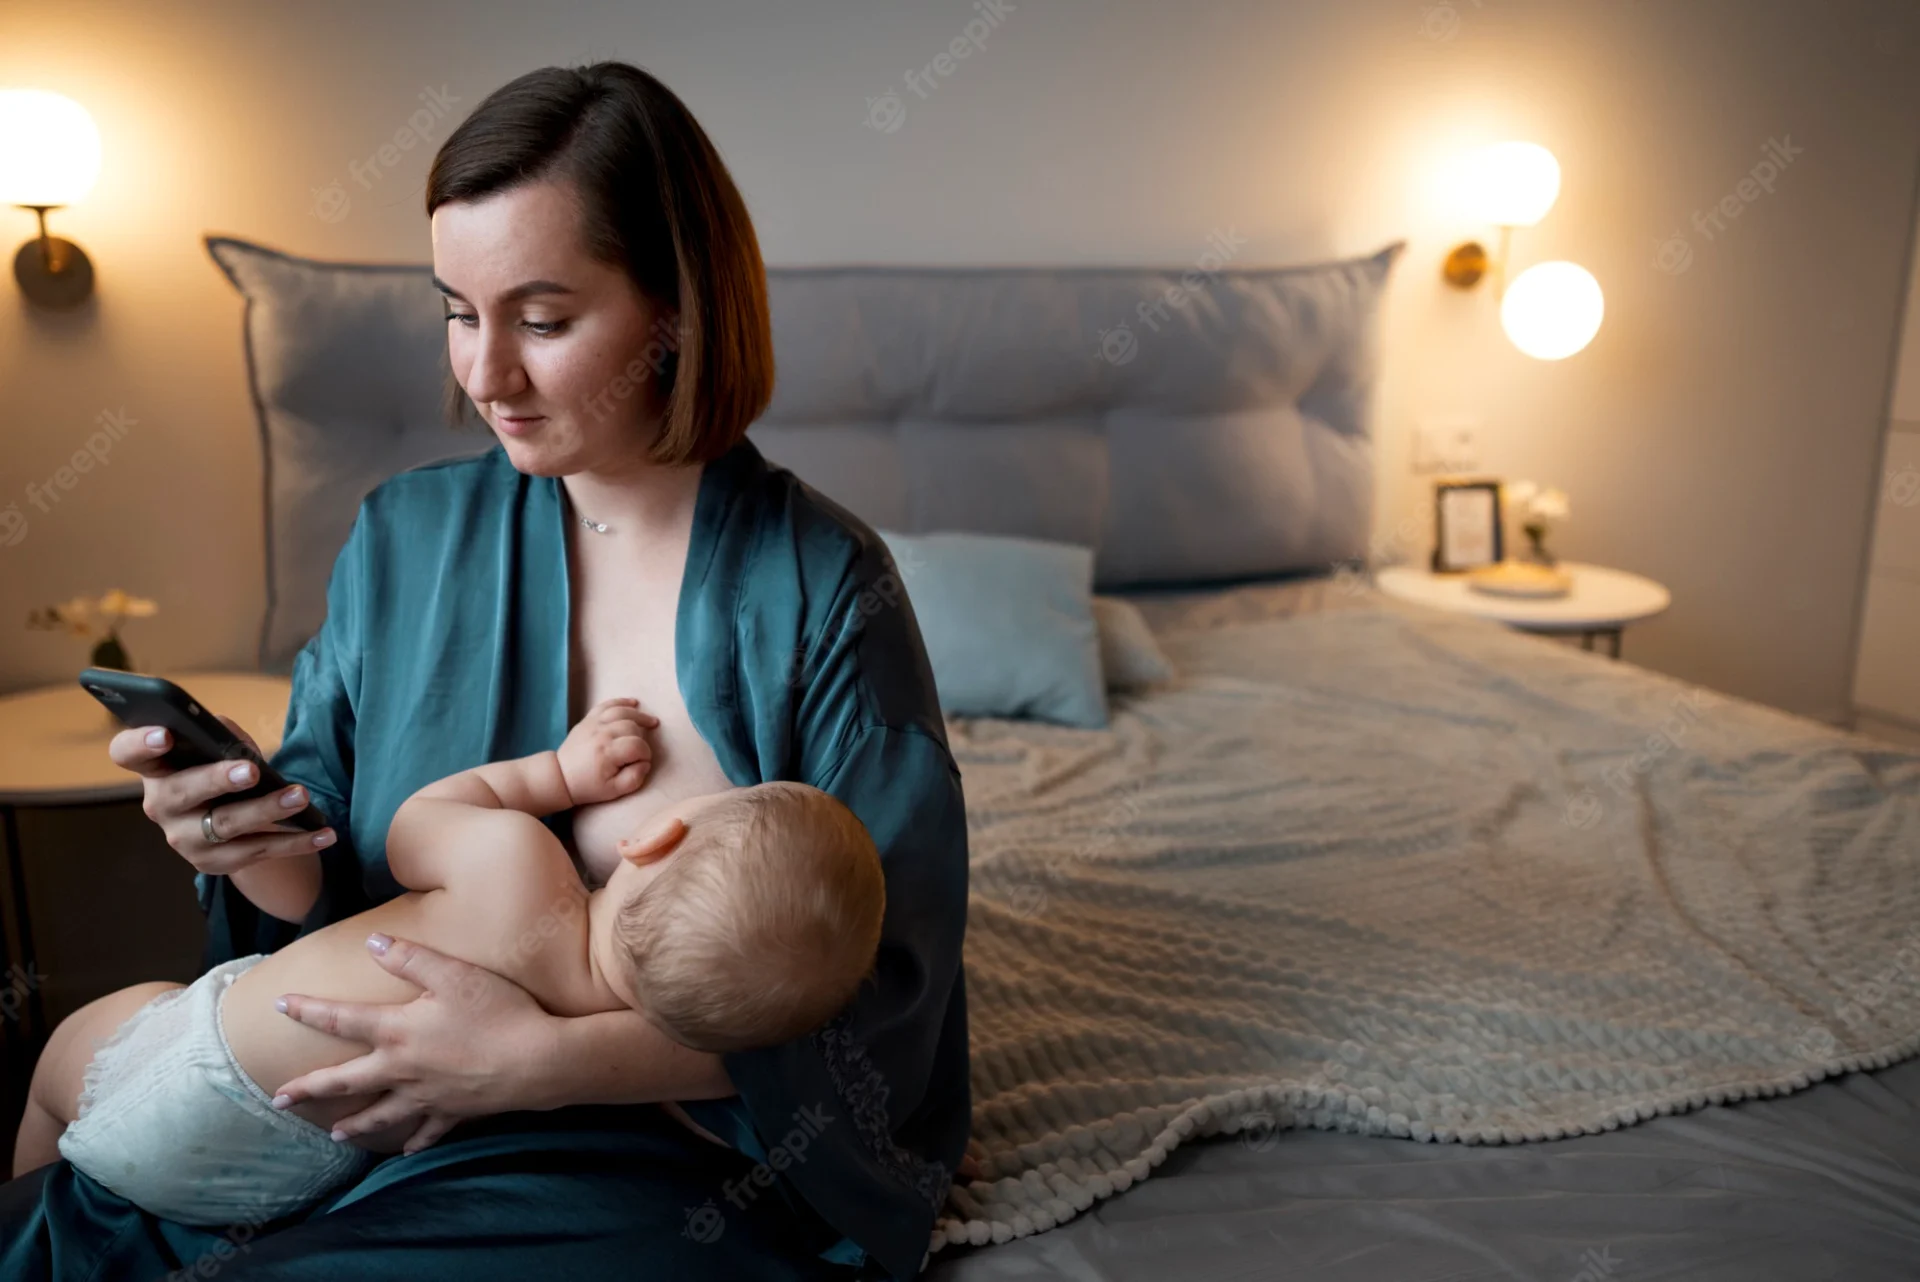 Phone - Bad Breastfeeding Habits That Hurts Your Baby